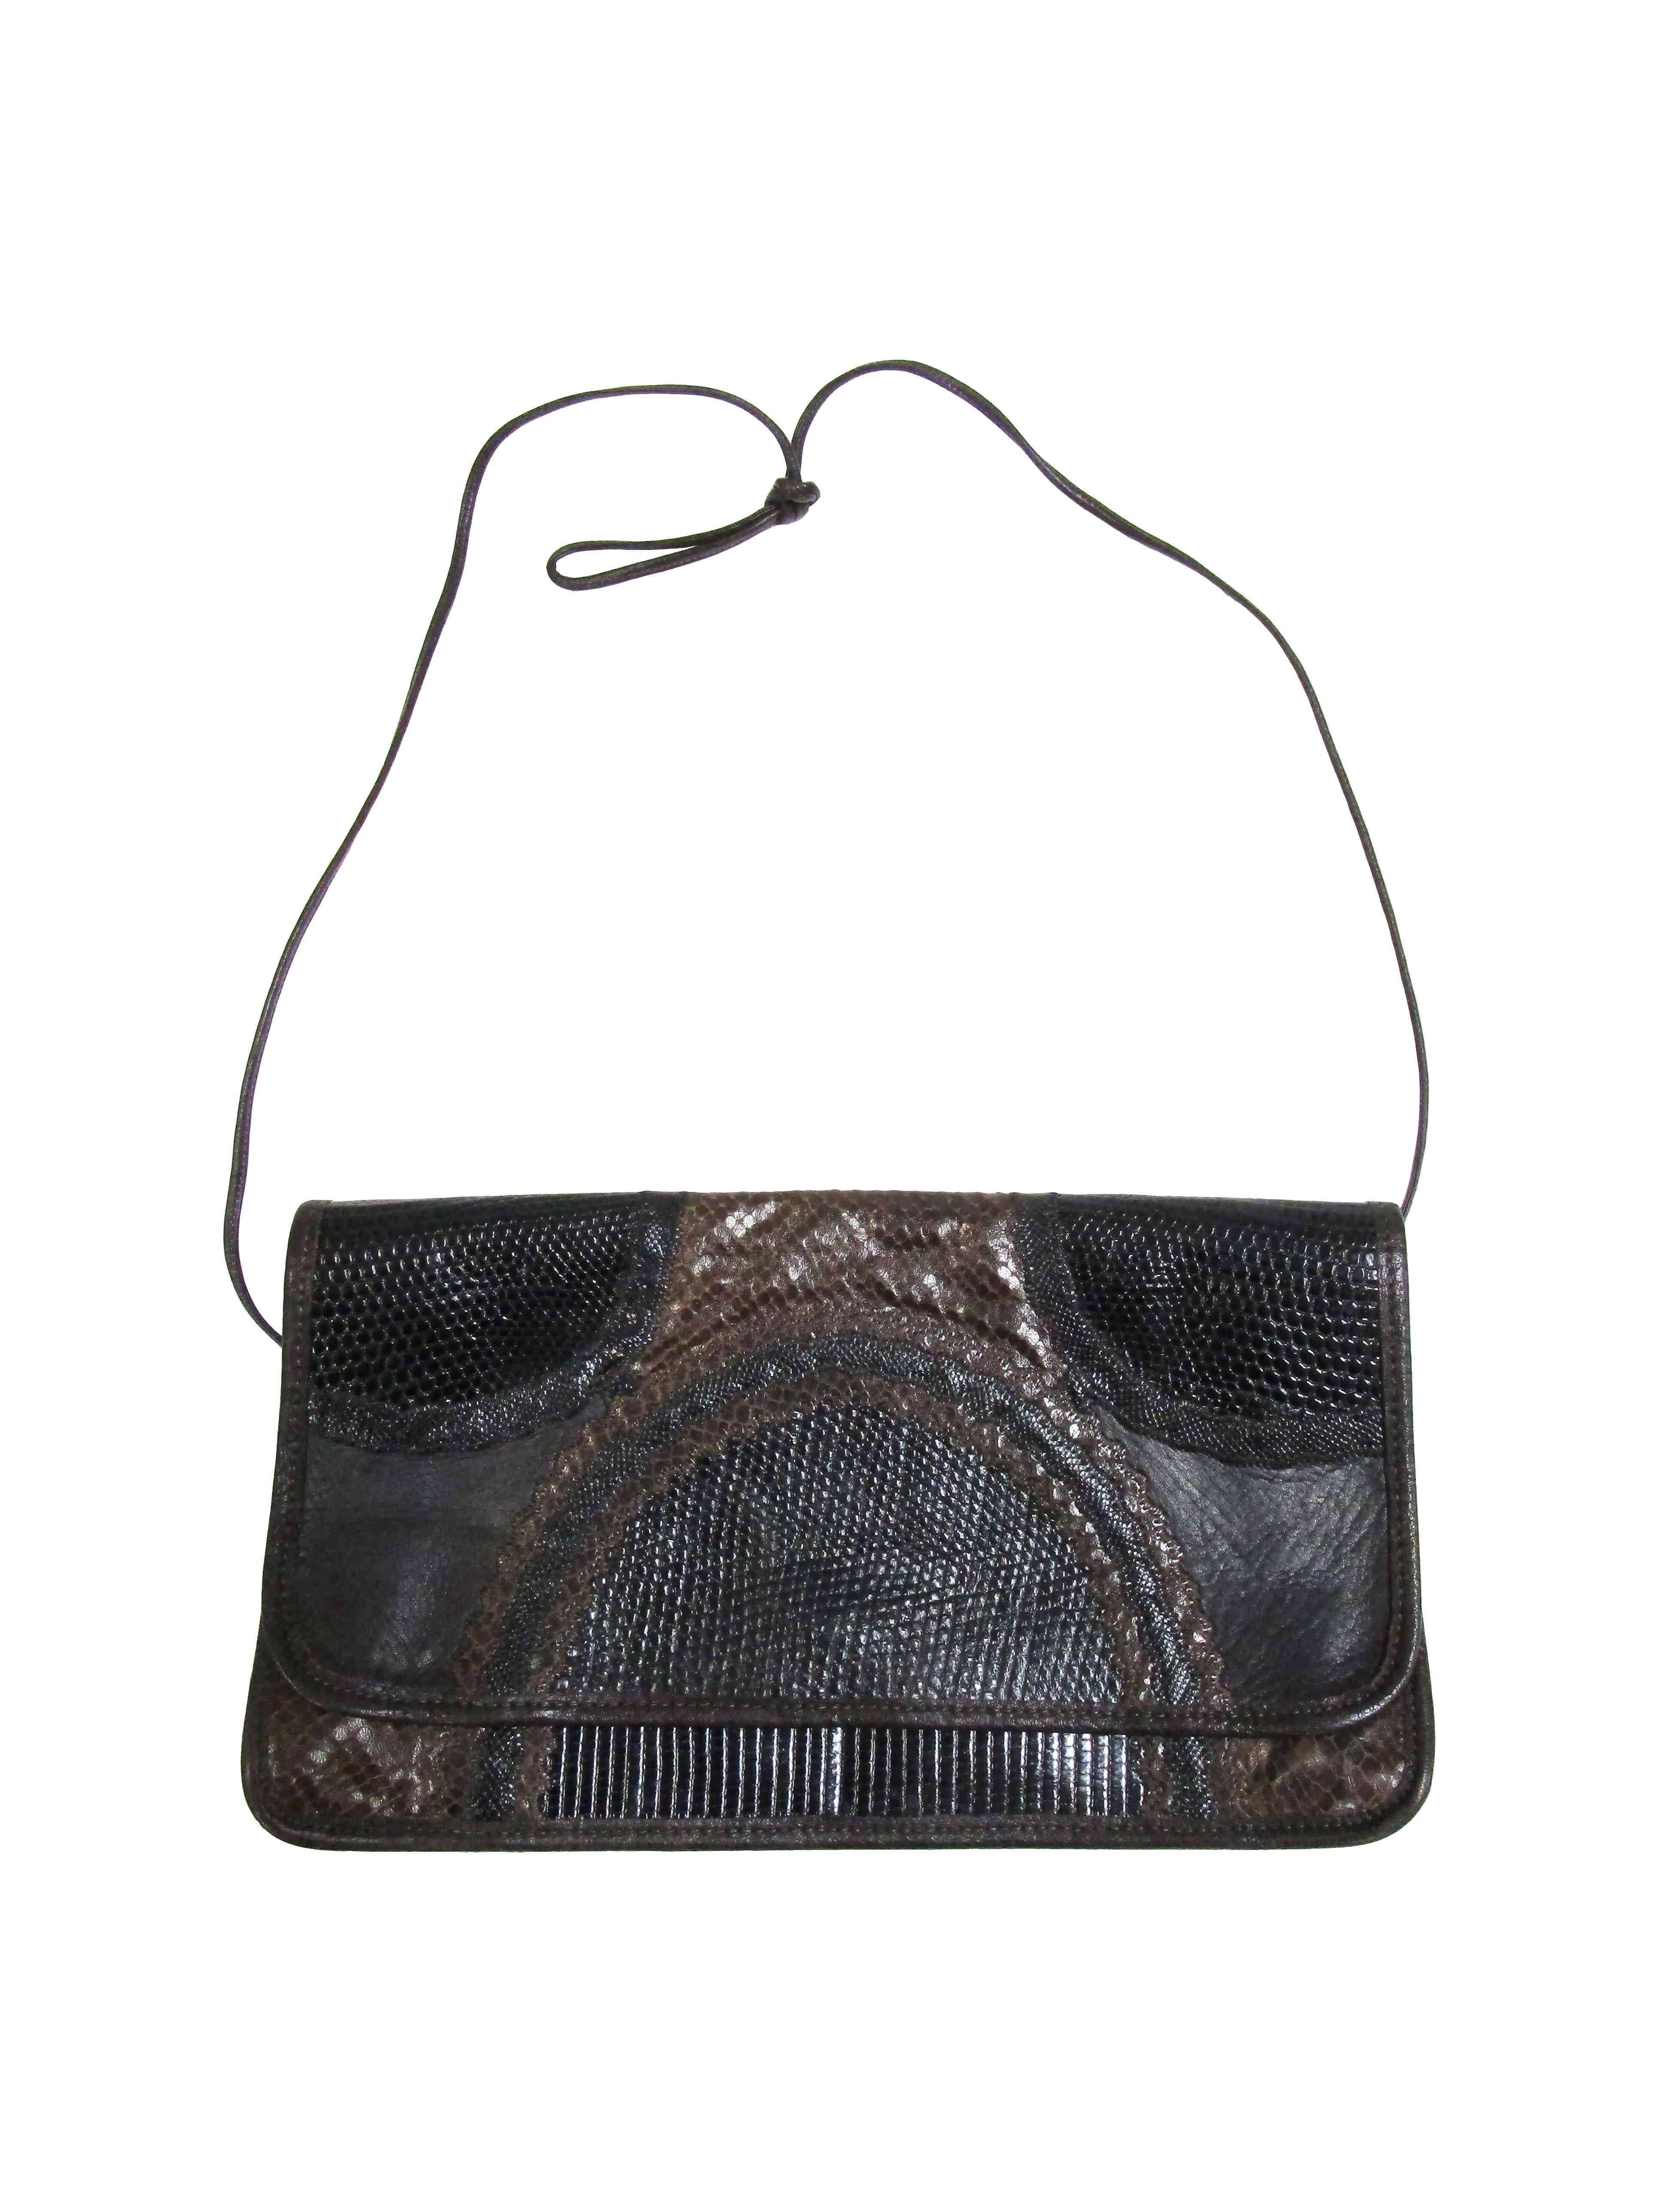 1980's Carlos Falchi Black Exotic Skins Clutch w/ Shoulder Strap In Good Condition For Sale In Houston, TX